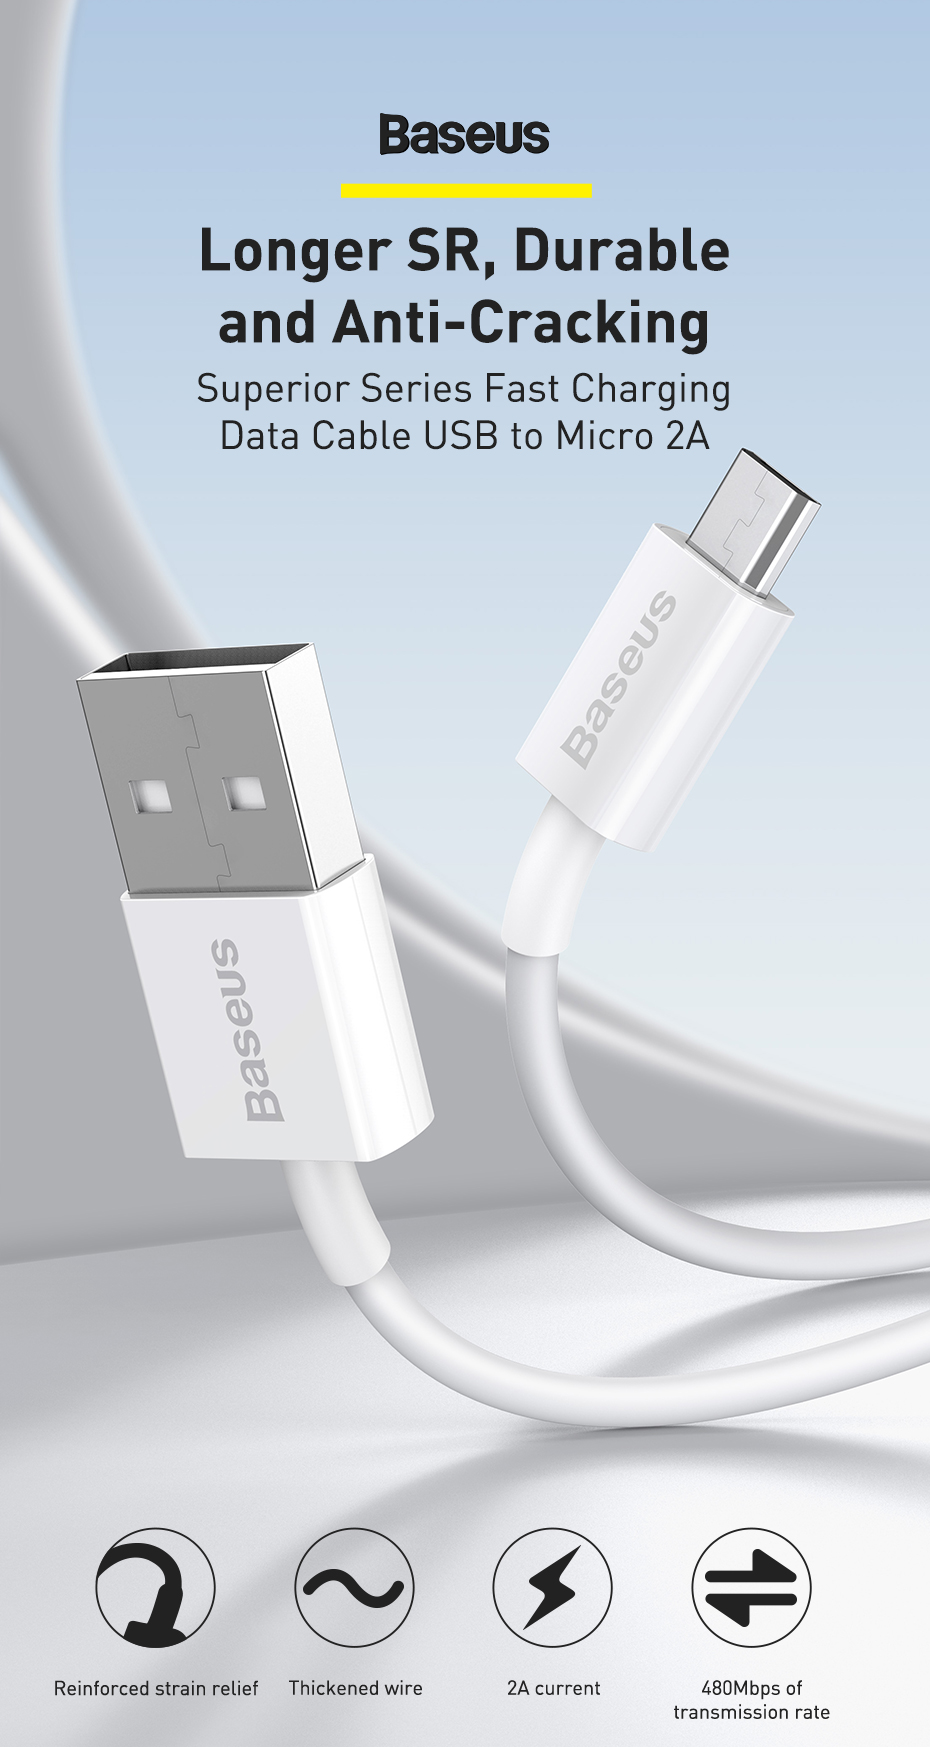 Baseus-2A-Sperior-Series-Micro-USB-Fast-Charging-Data-Cable-for-Mobile-Phone-Power-Bank-Tablet-Deskt-1857042-1